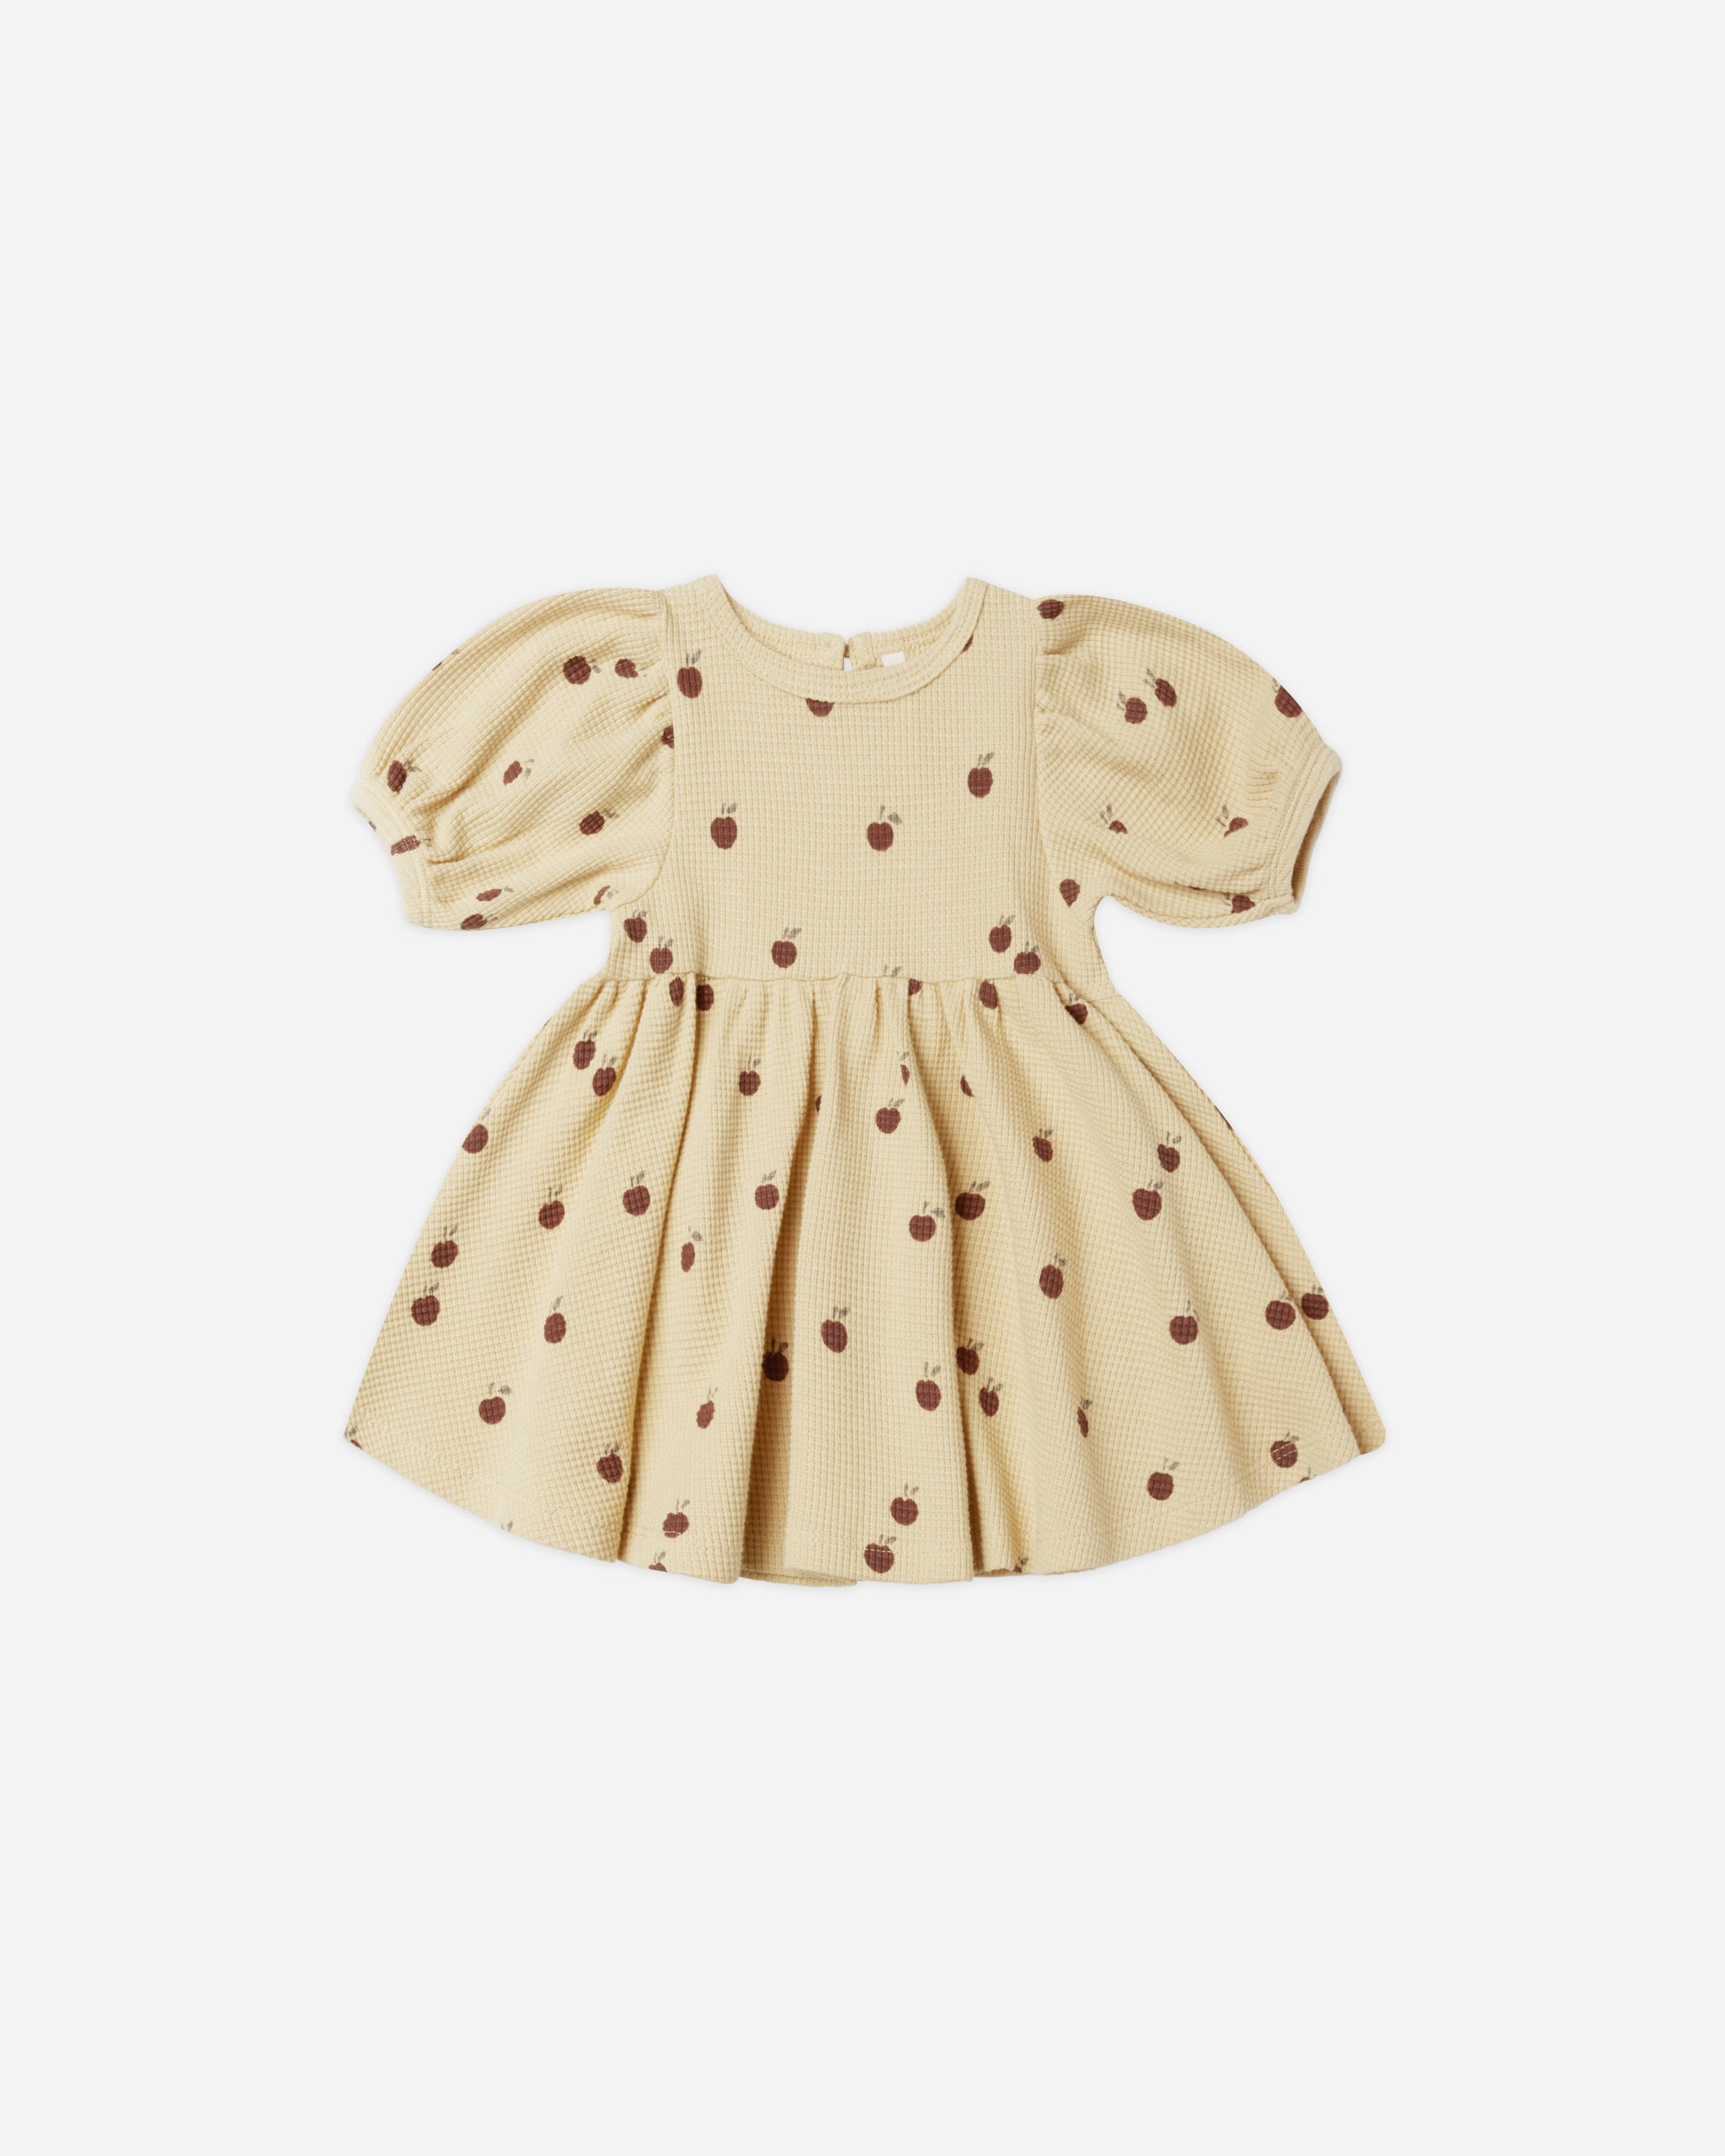 Waffle Babydoll Dress || Apples - Rylee + Cru | Kids Clothes | Trendy Baby Clothes | Modern Infant Outfits |